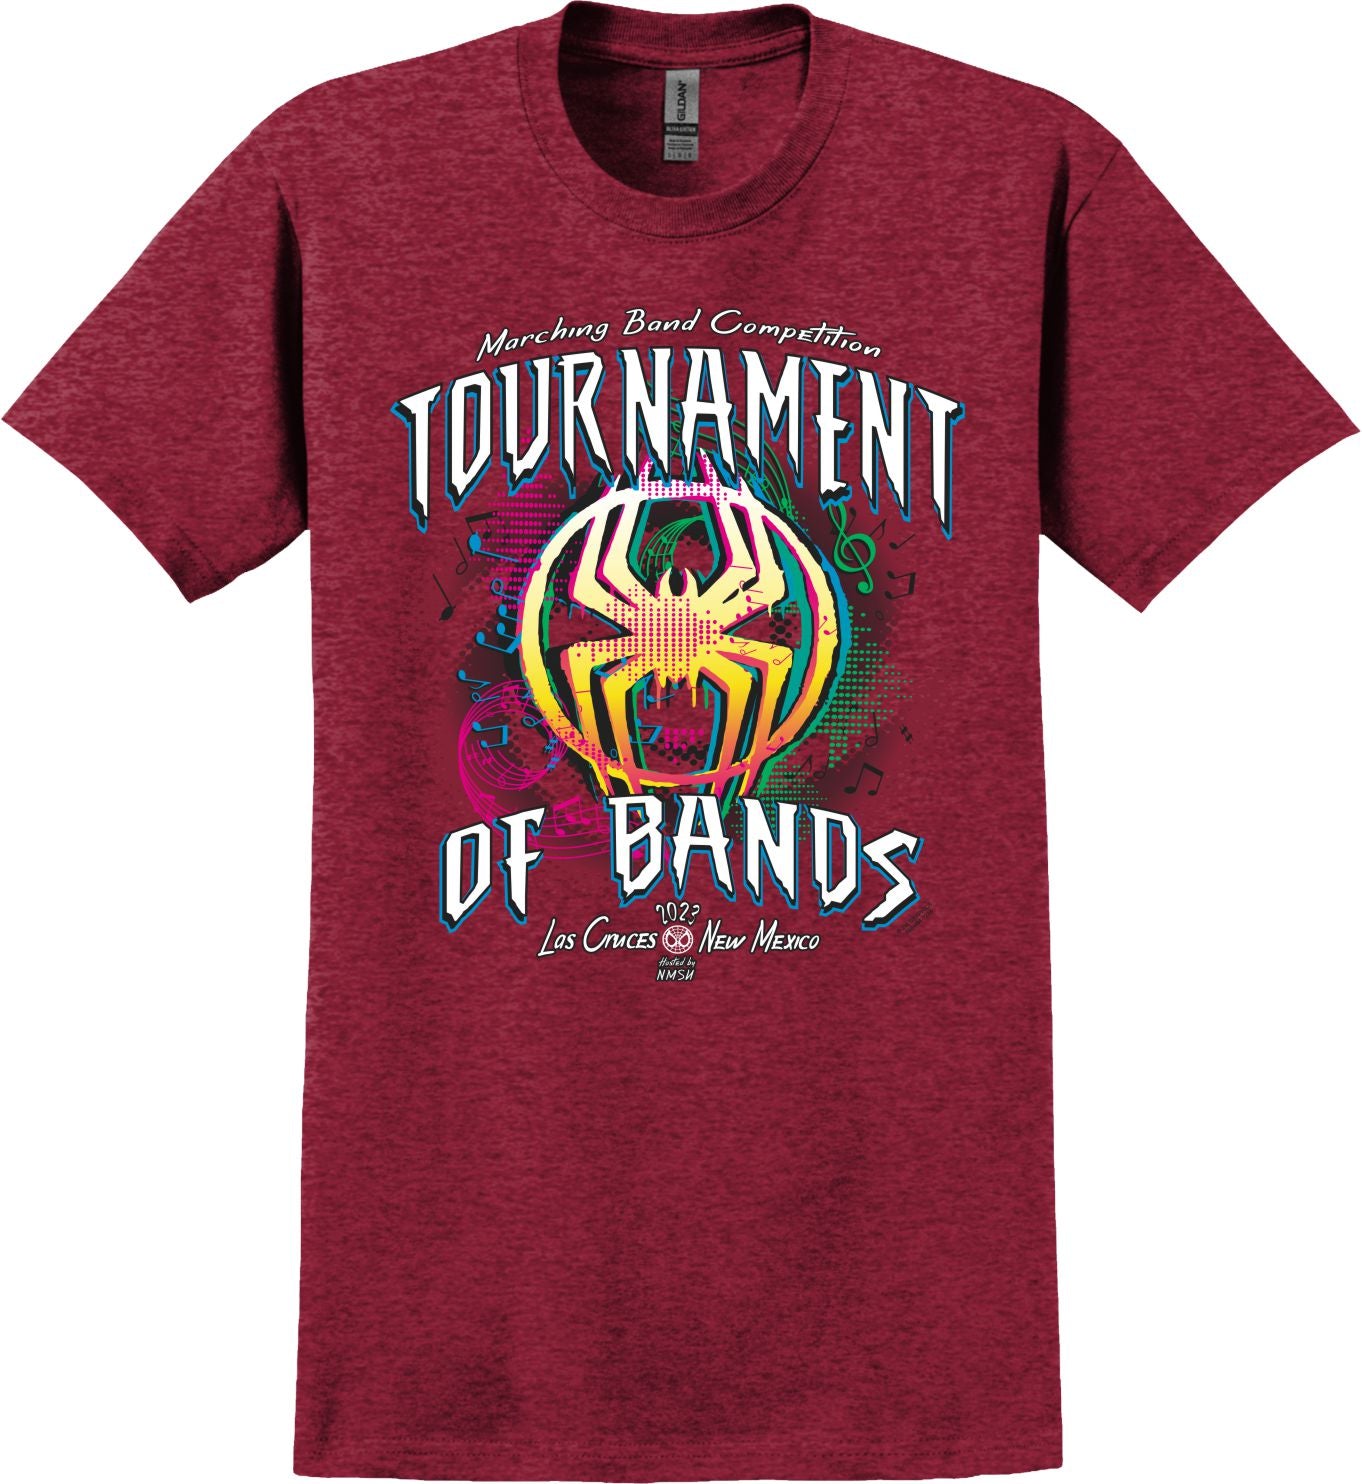 Tournament of Bands 2023 Antique Cherry Red Tee